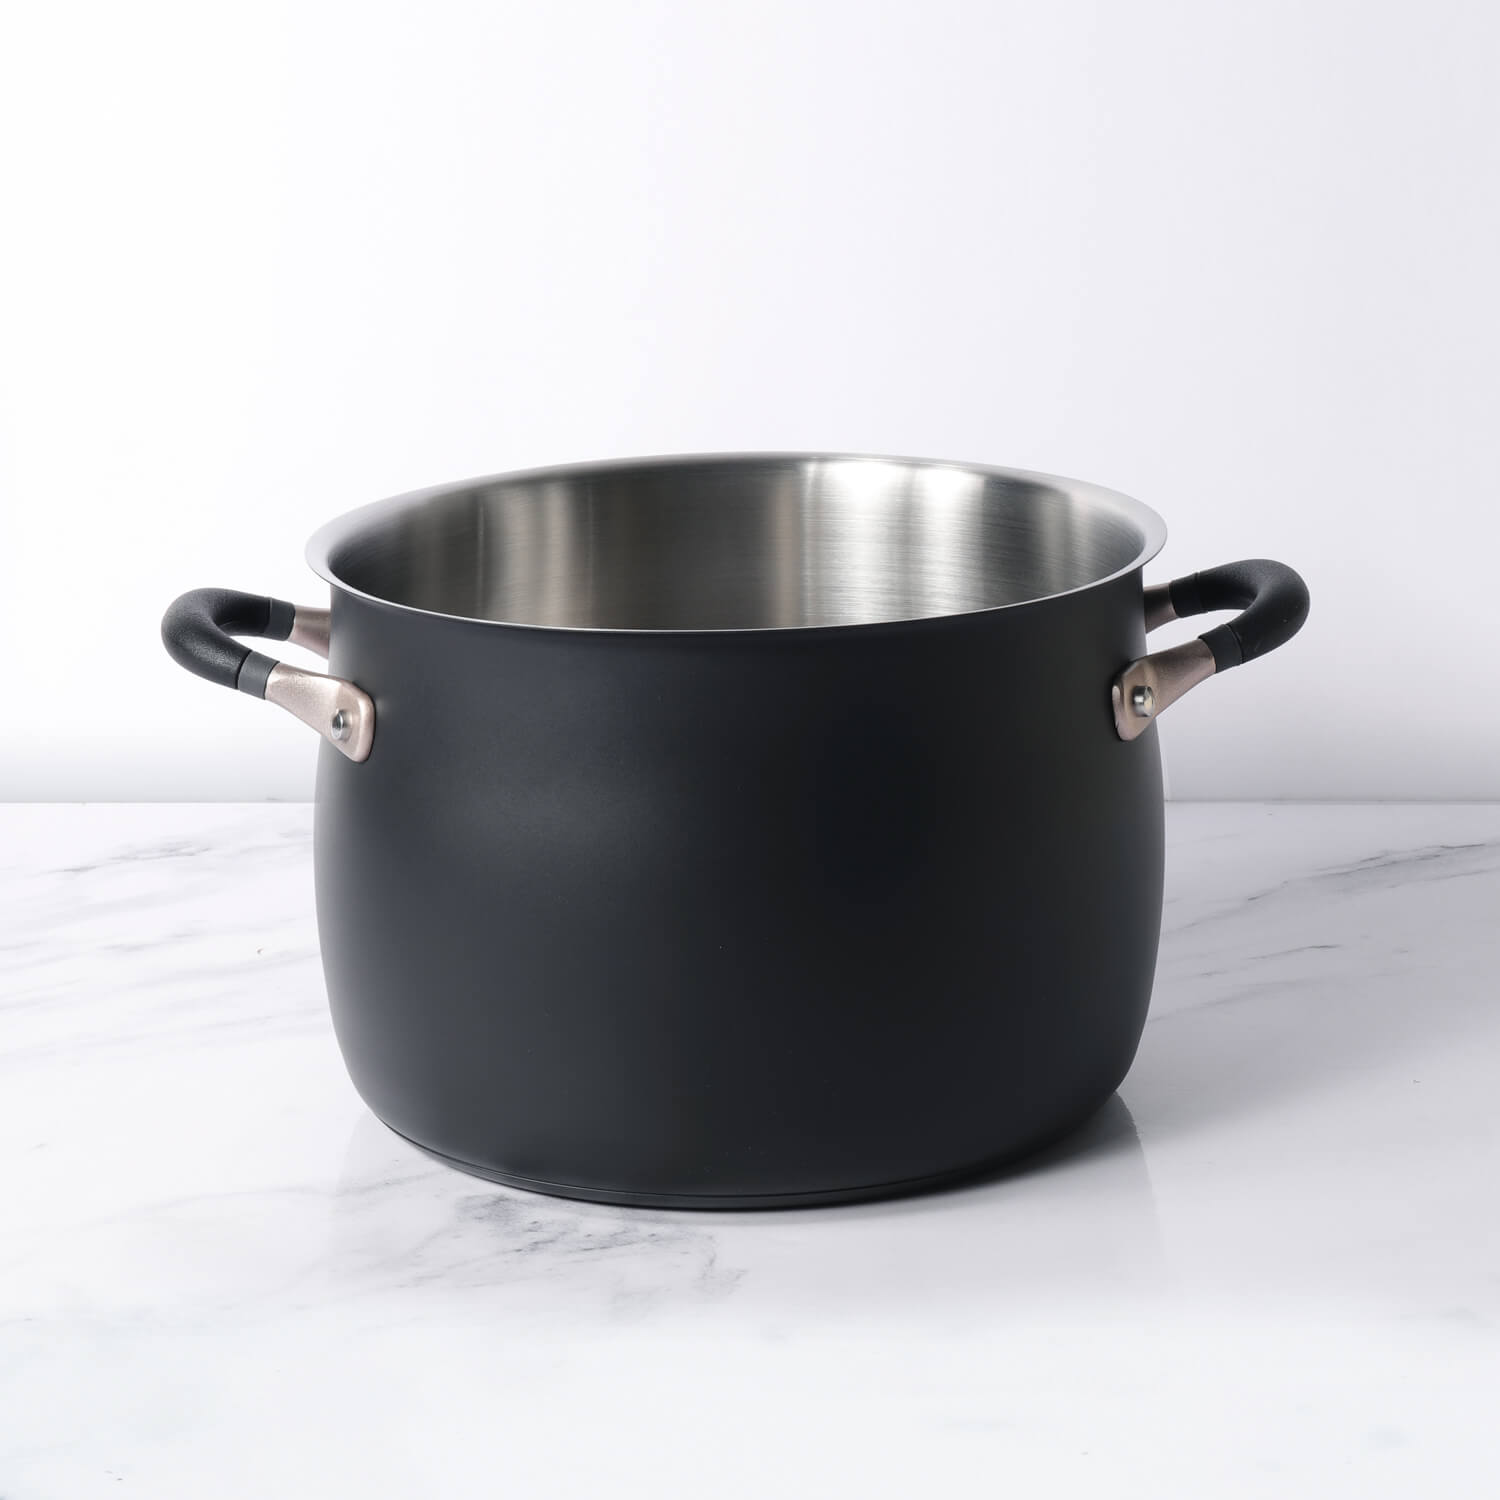 Meyer Cookware - Accent Stainless Steel Dutch Oven